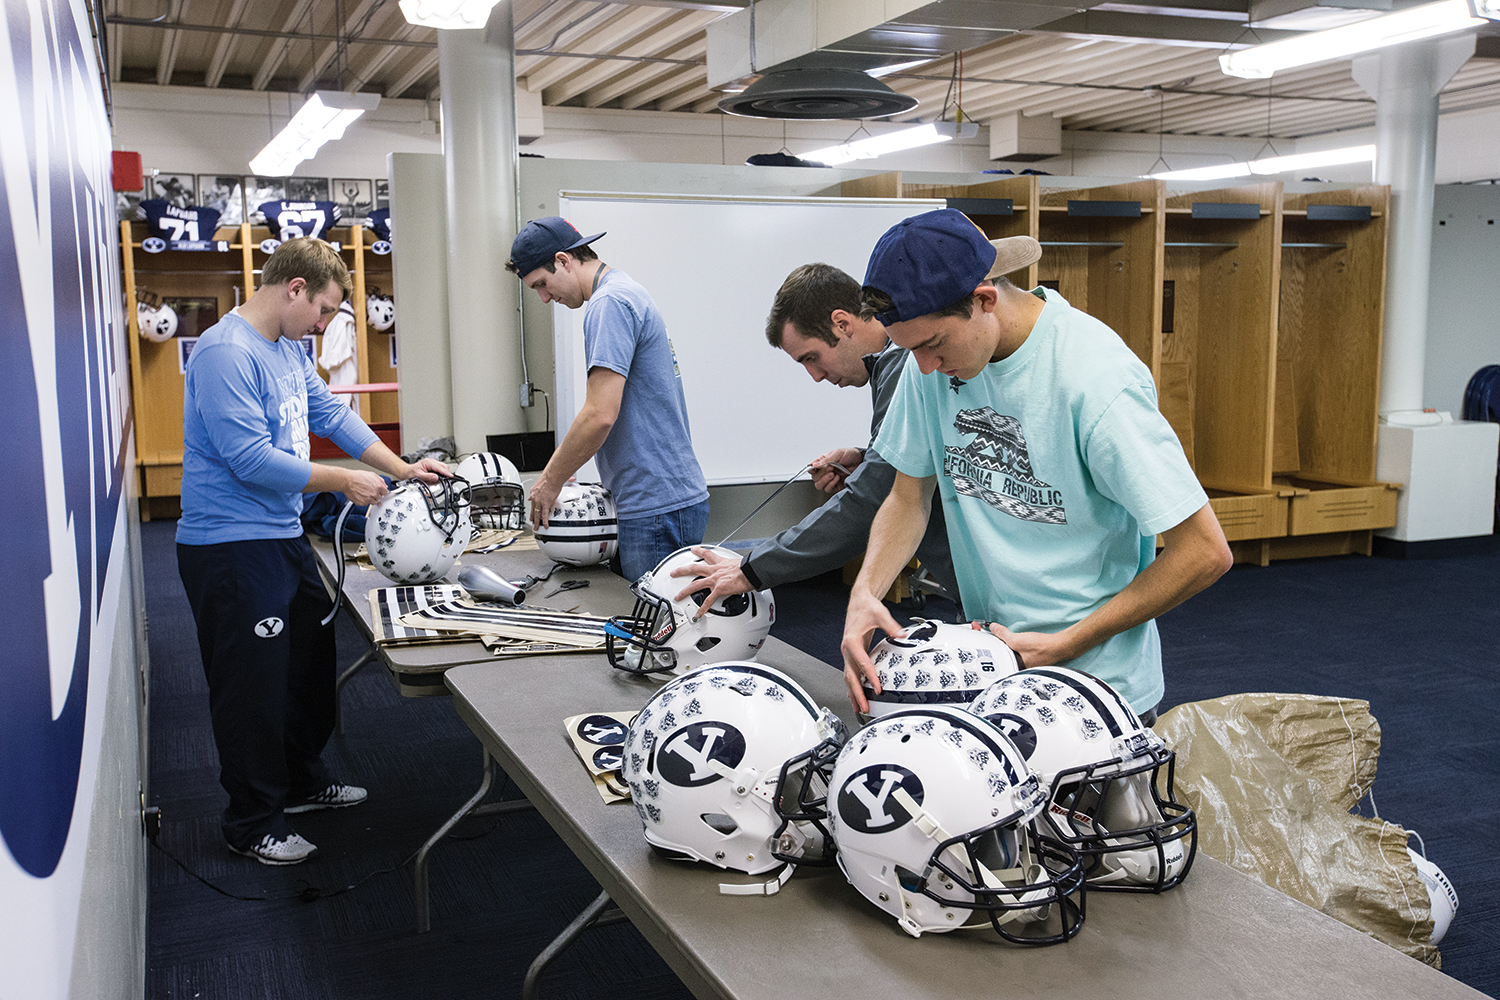 Student workers prepare football helmets for the upcoming game.